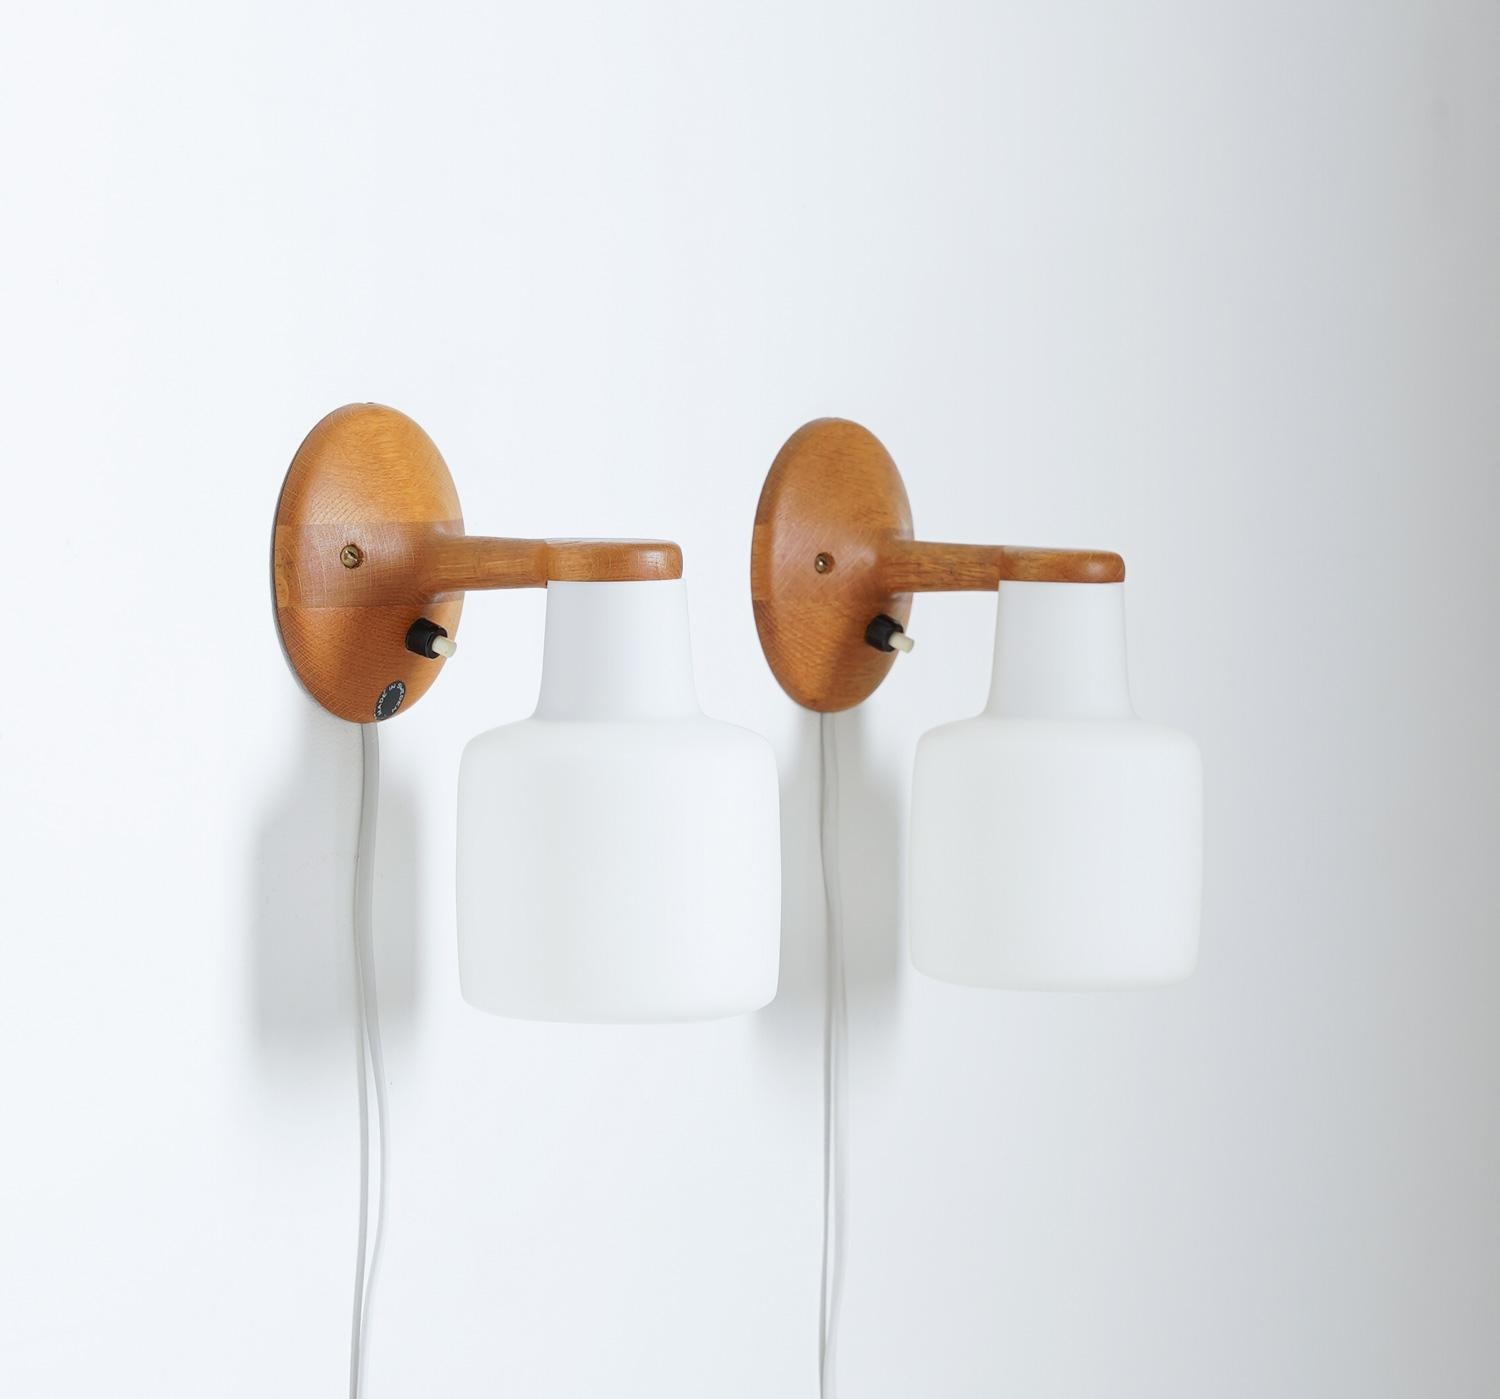 Wall lamps by Uno & Östen Kristiansson for Luxus, Sweden.
The lamps are made of oak with white opaline glass shades and give a soft, ambient light when lit. 

Condition: One lamp has a slight crack in the wood, hardly visible, that has been